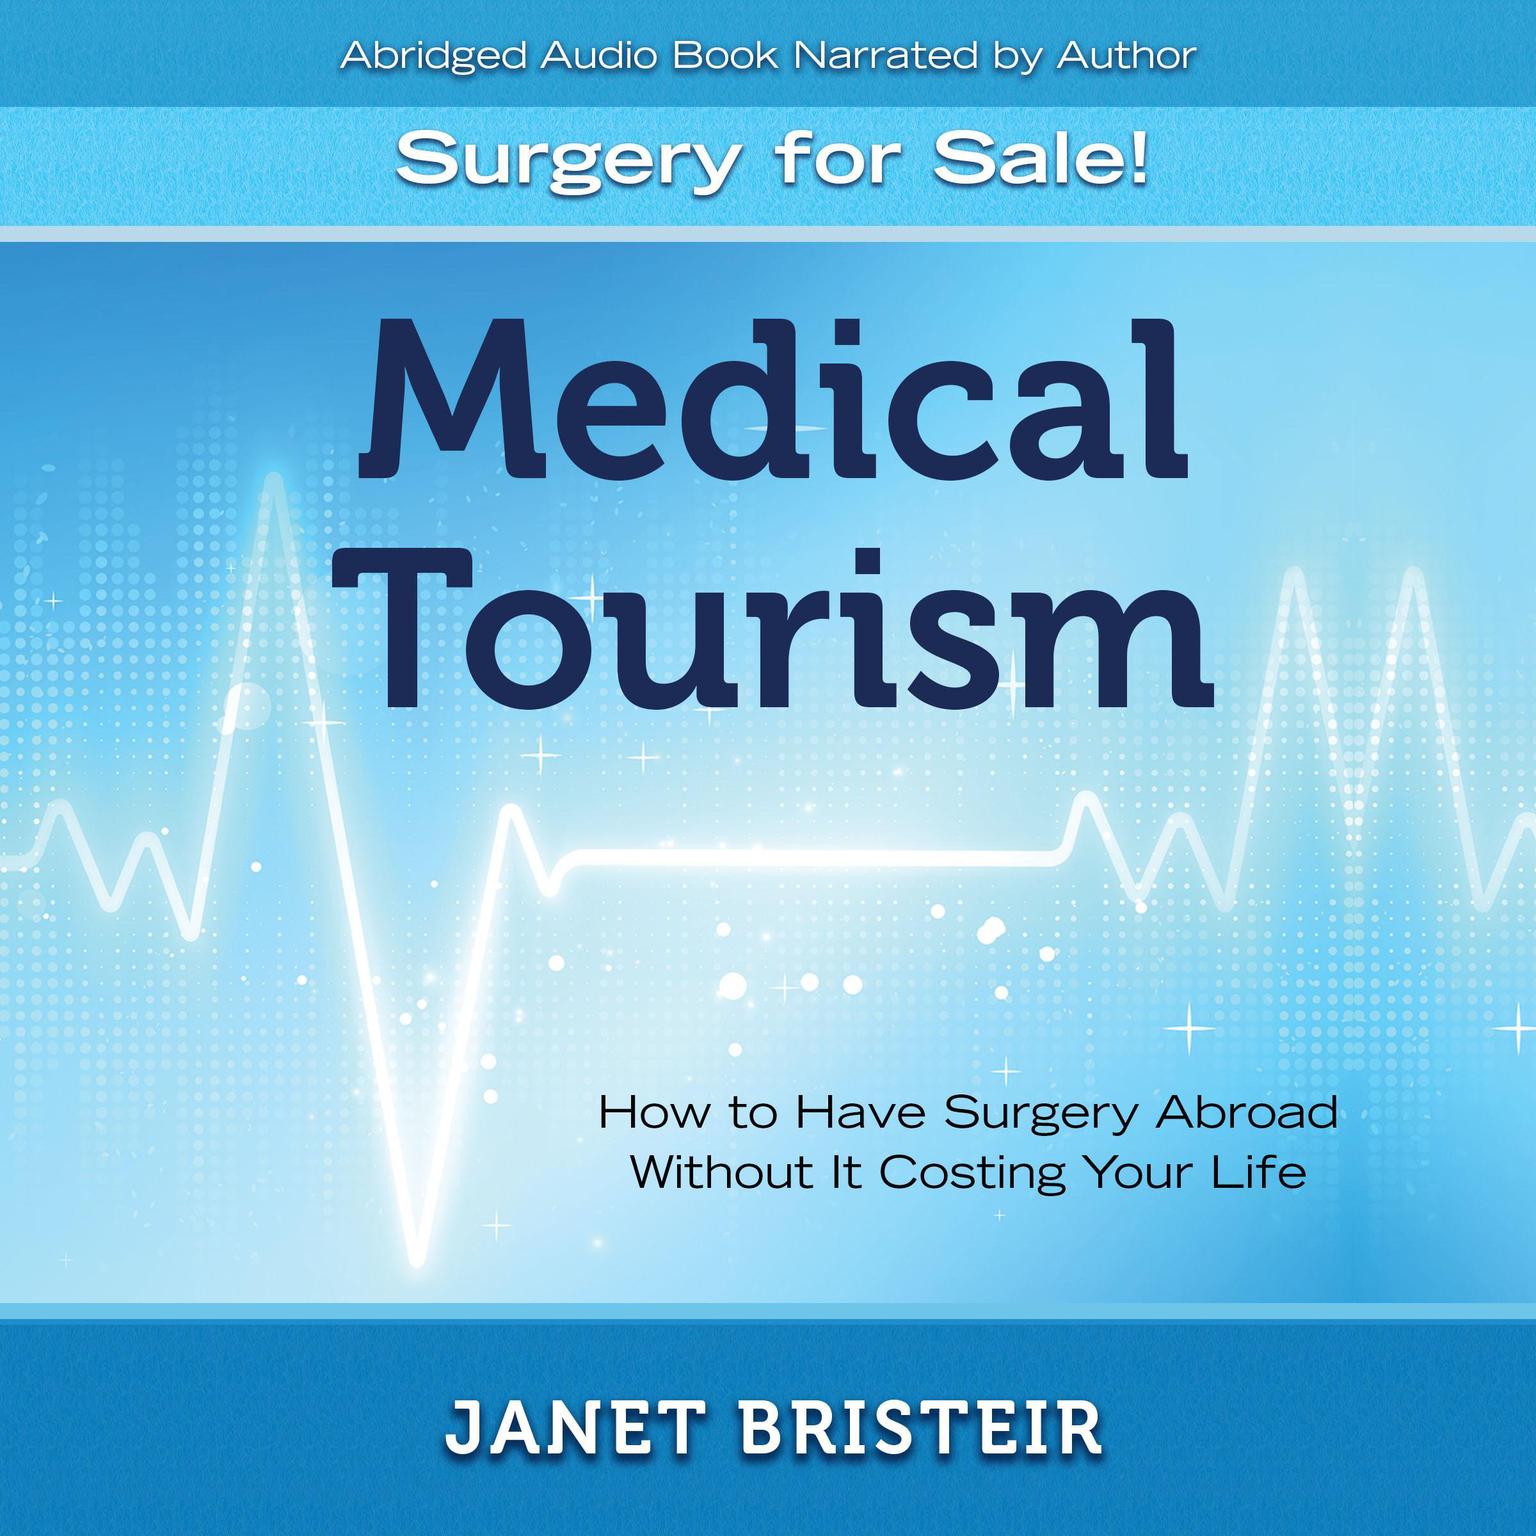 Medical Tourism - Surgery for Sale! (Abridged): How to Have Surgery Abroad Without It Costing Your Life Audiobook, by Janet Bristeir